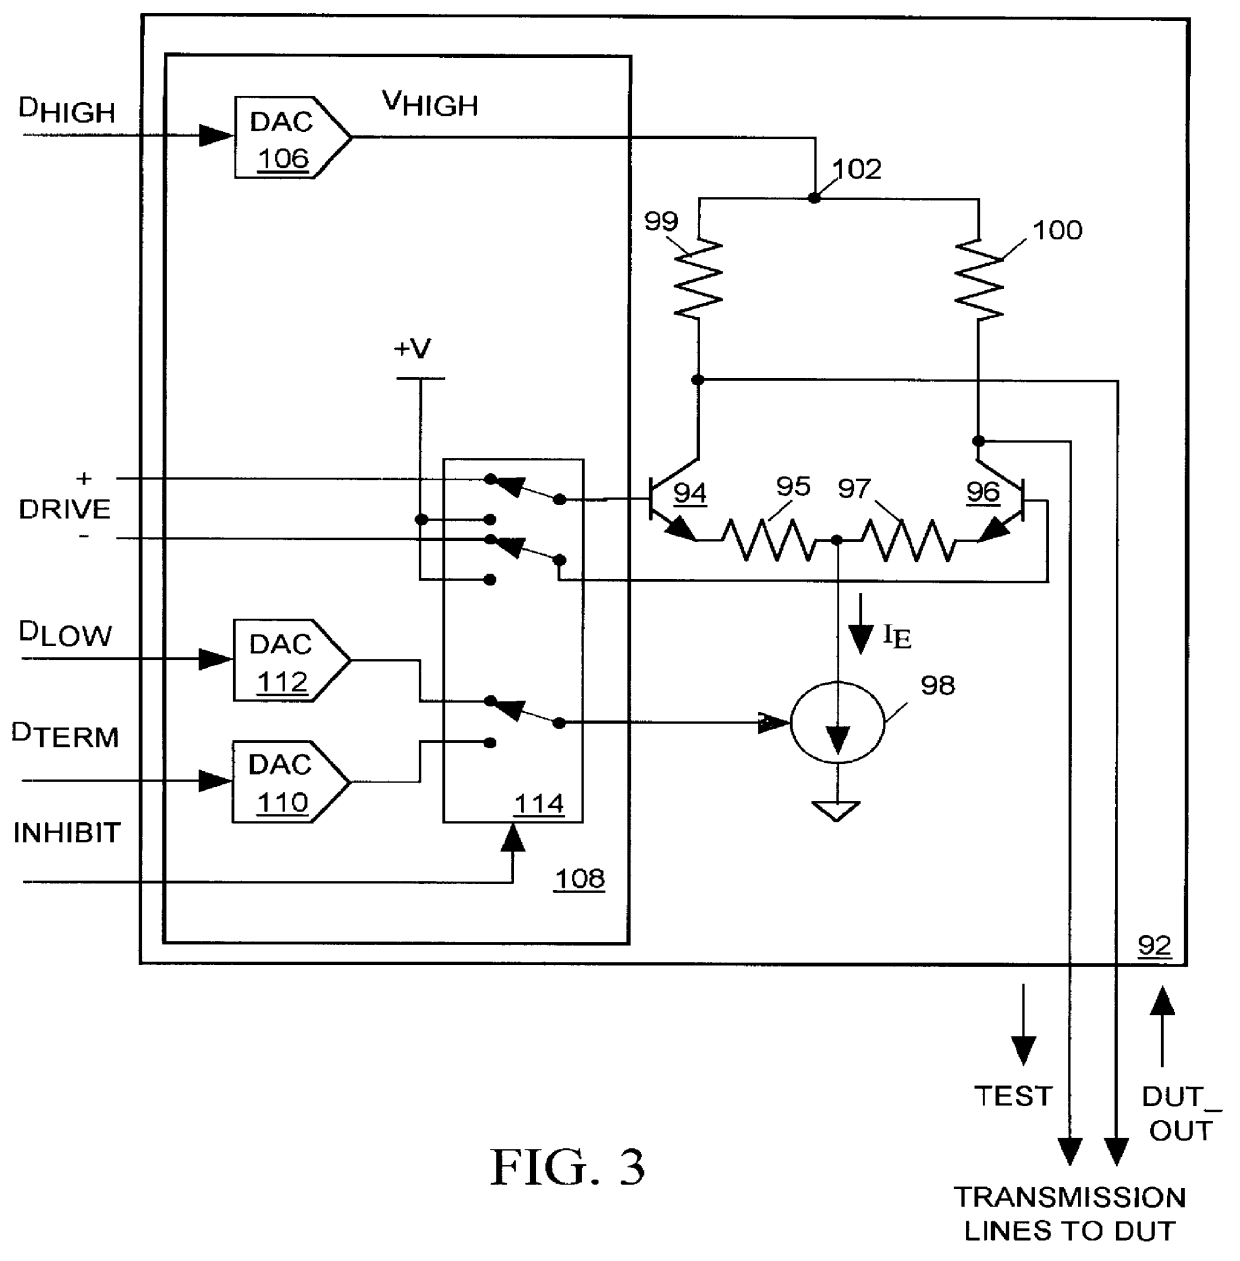 Inhibitable continuously-terminated differential drive circuit for an integrated circuit tester